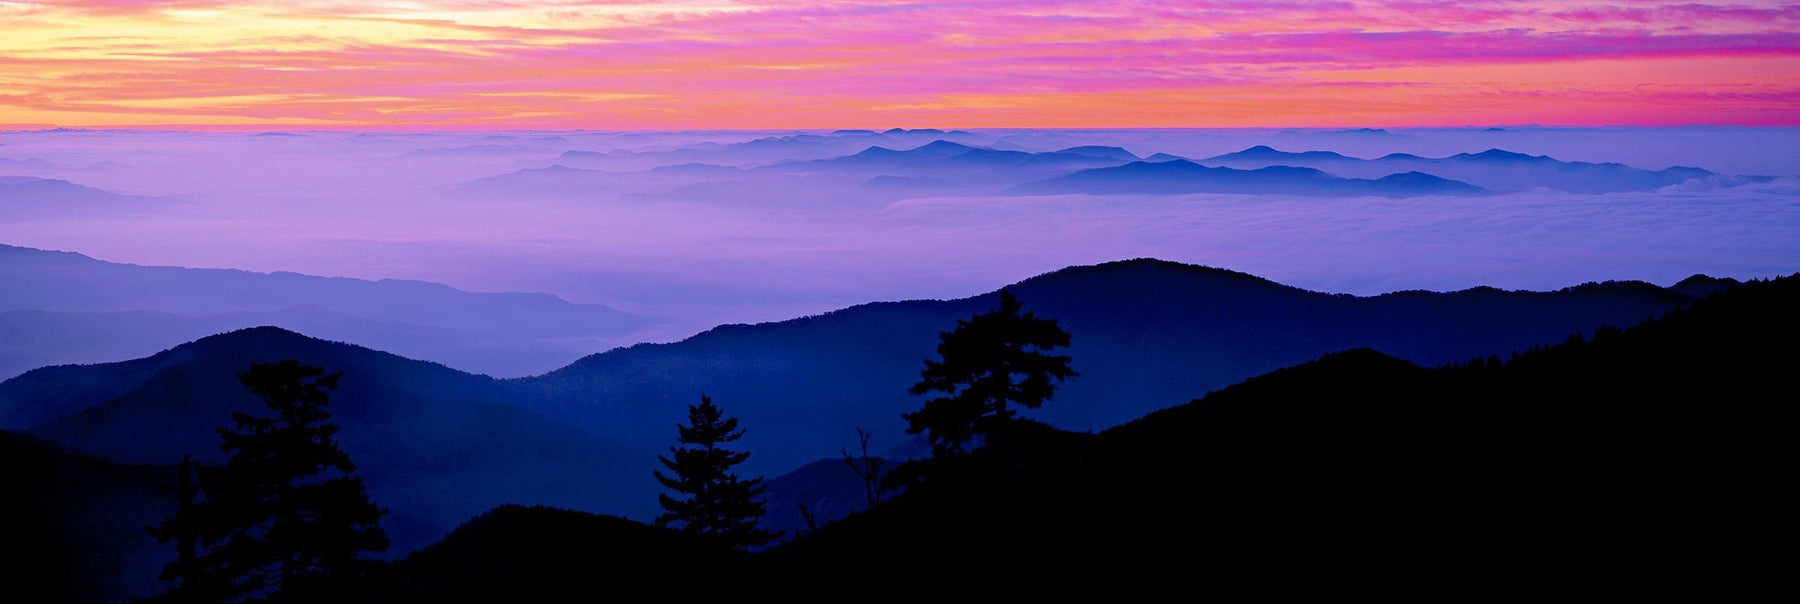 View looking down over the fog covered Great Smoky Mountains of Tennessee at sunrise